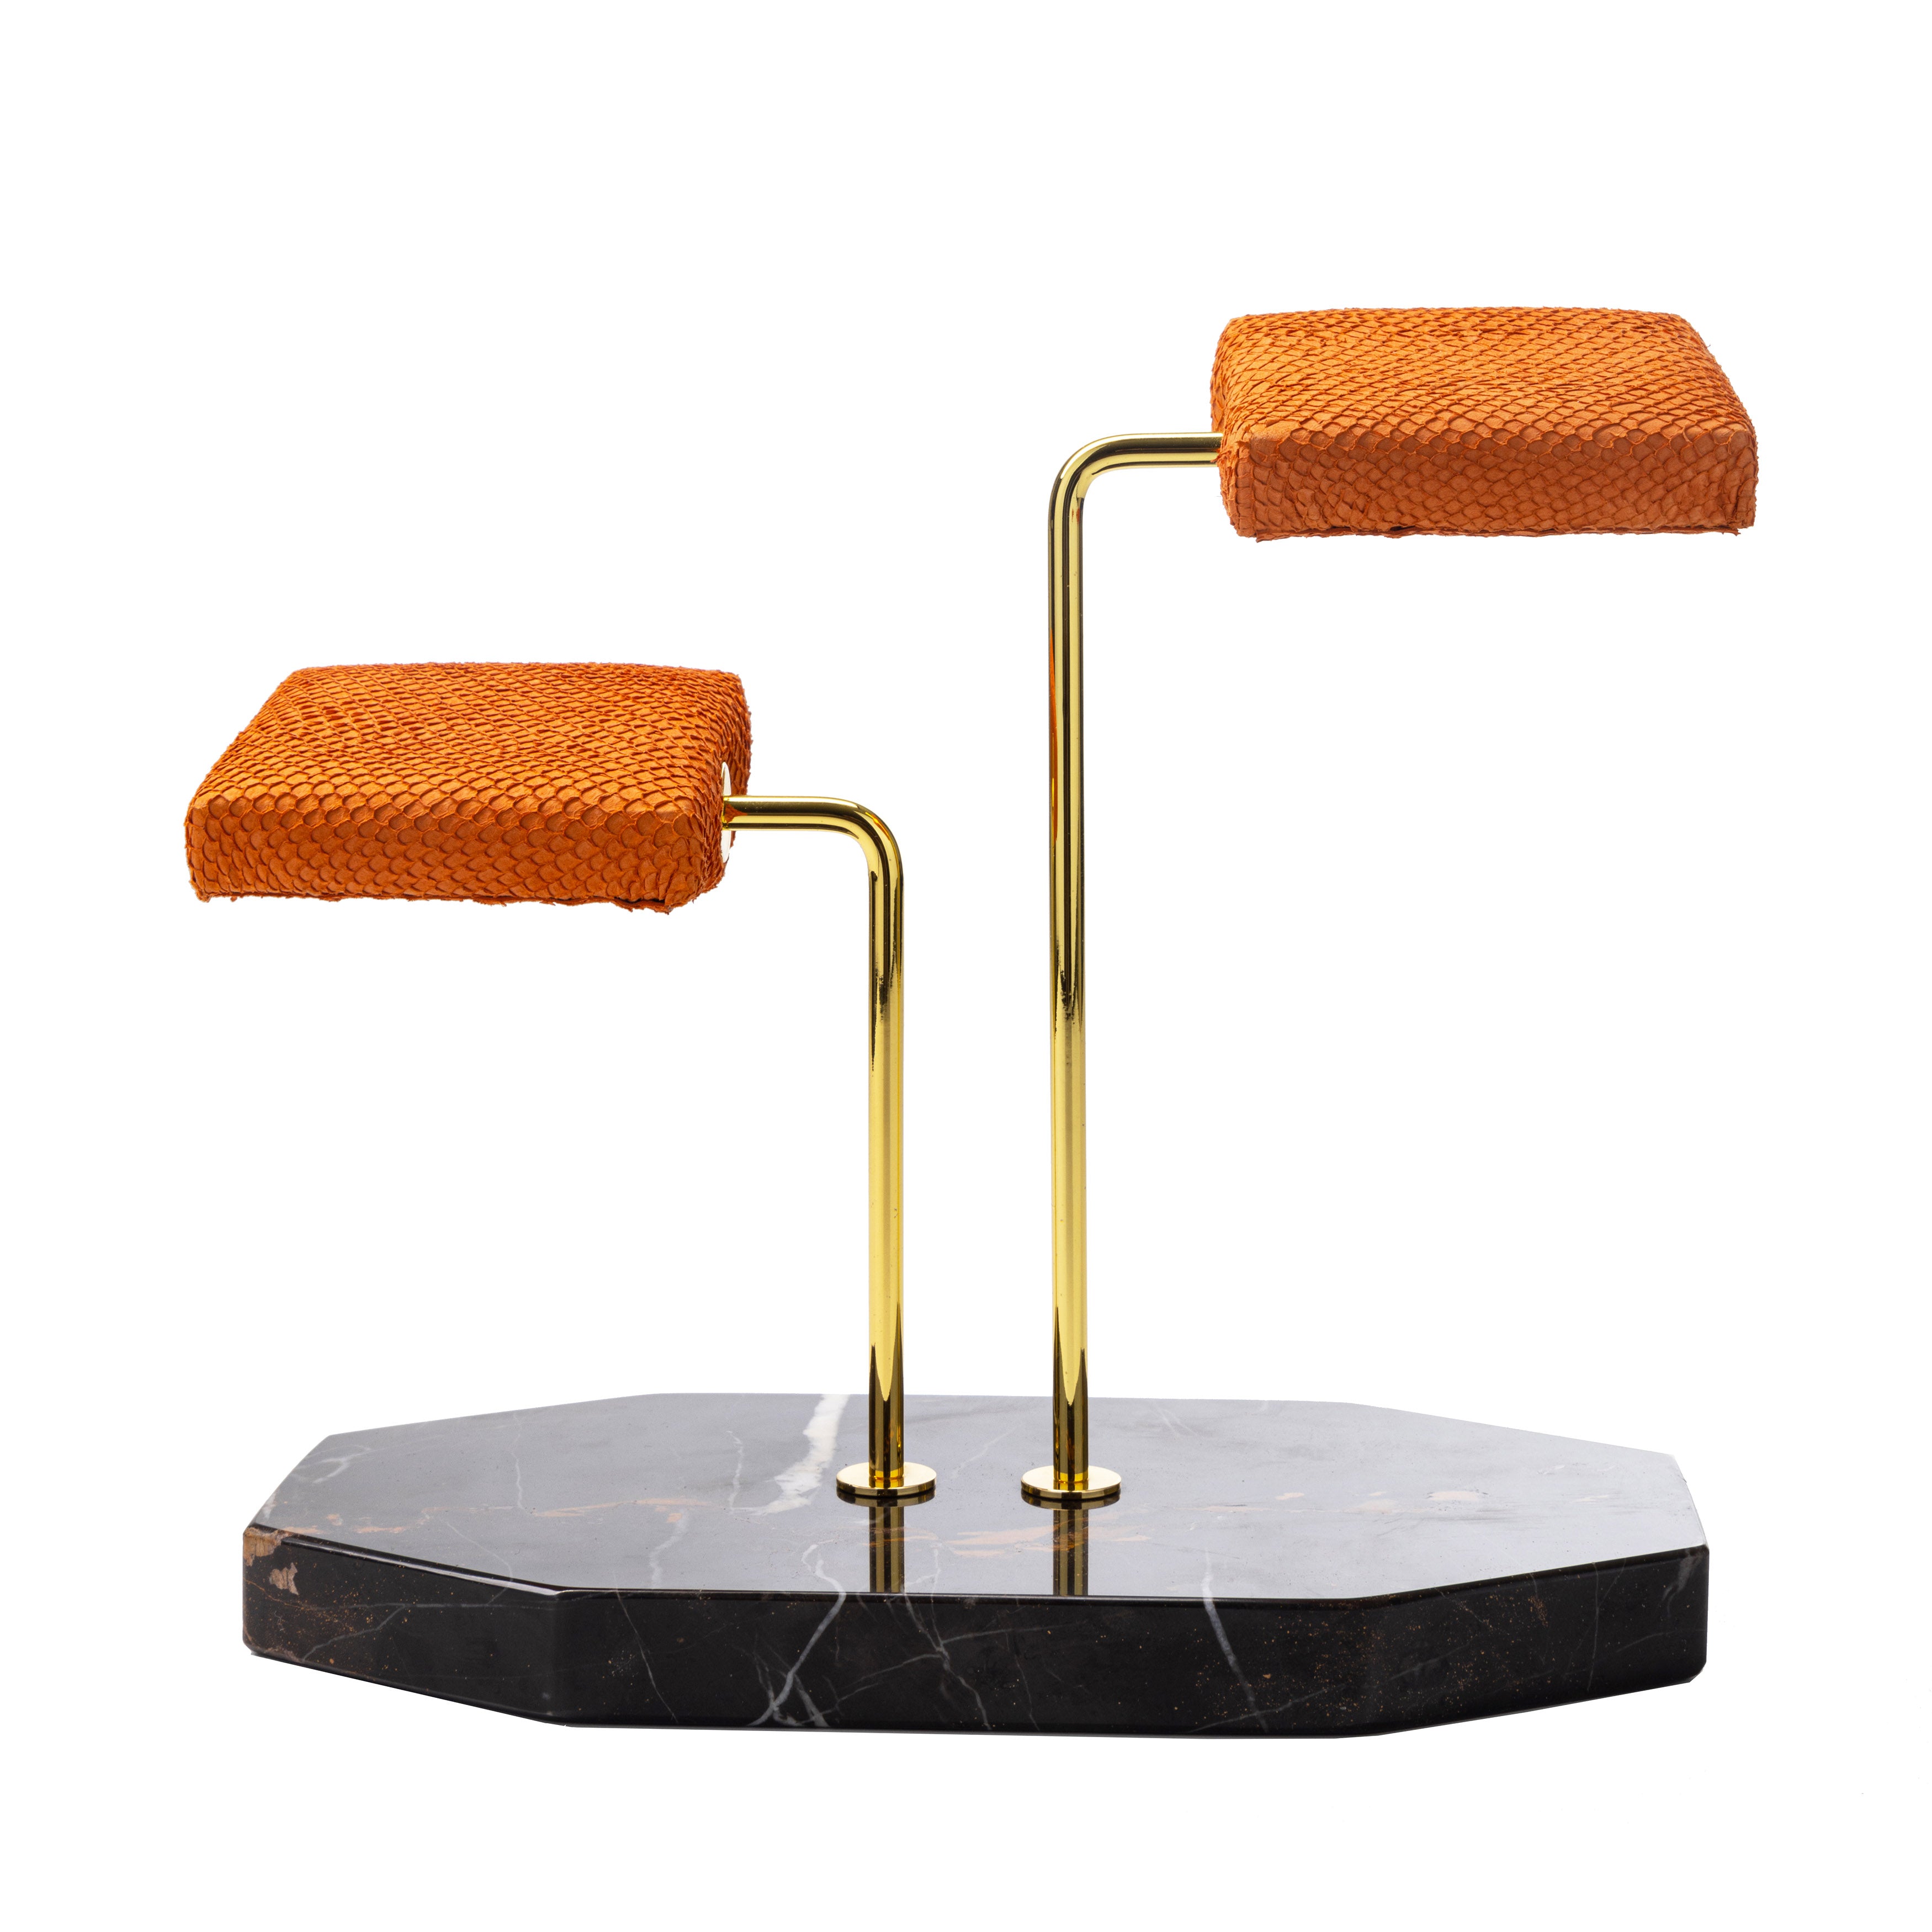 Dual Watch Stand - Orange Salmon (Limited Edition)